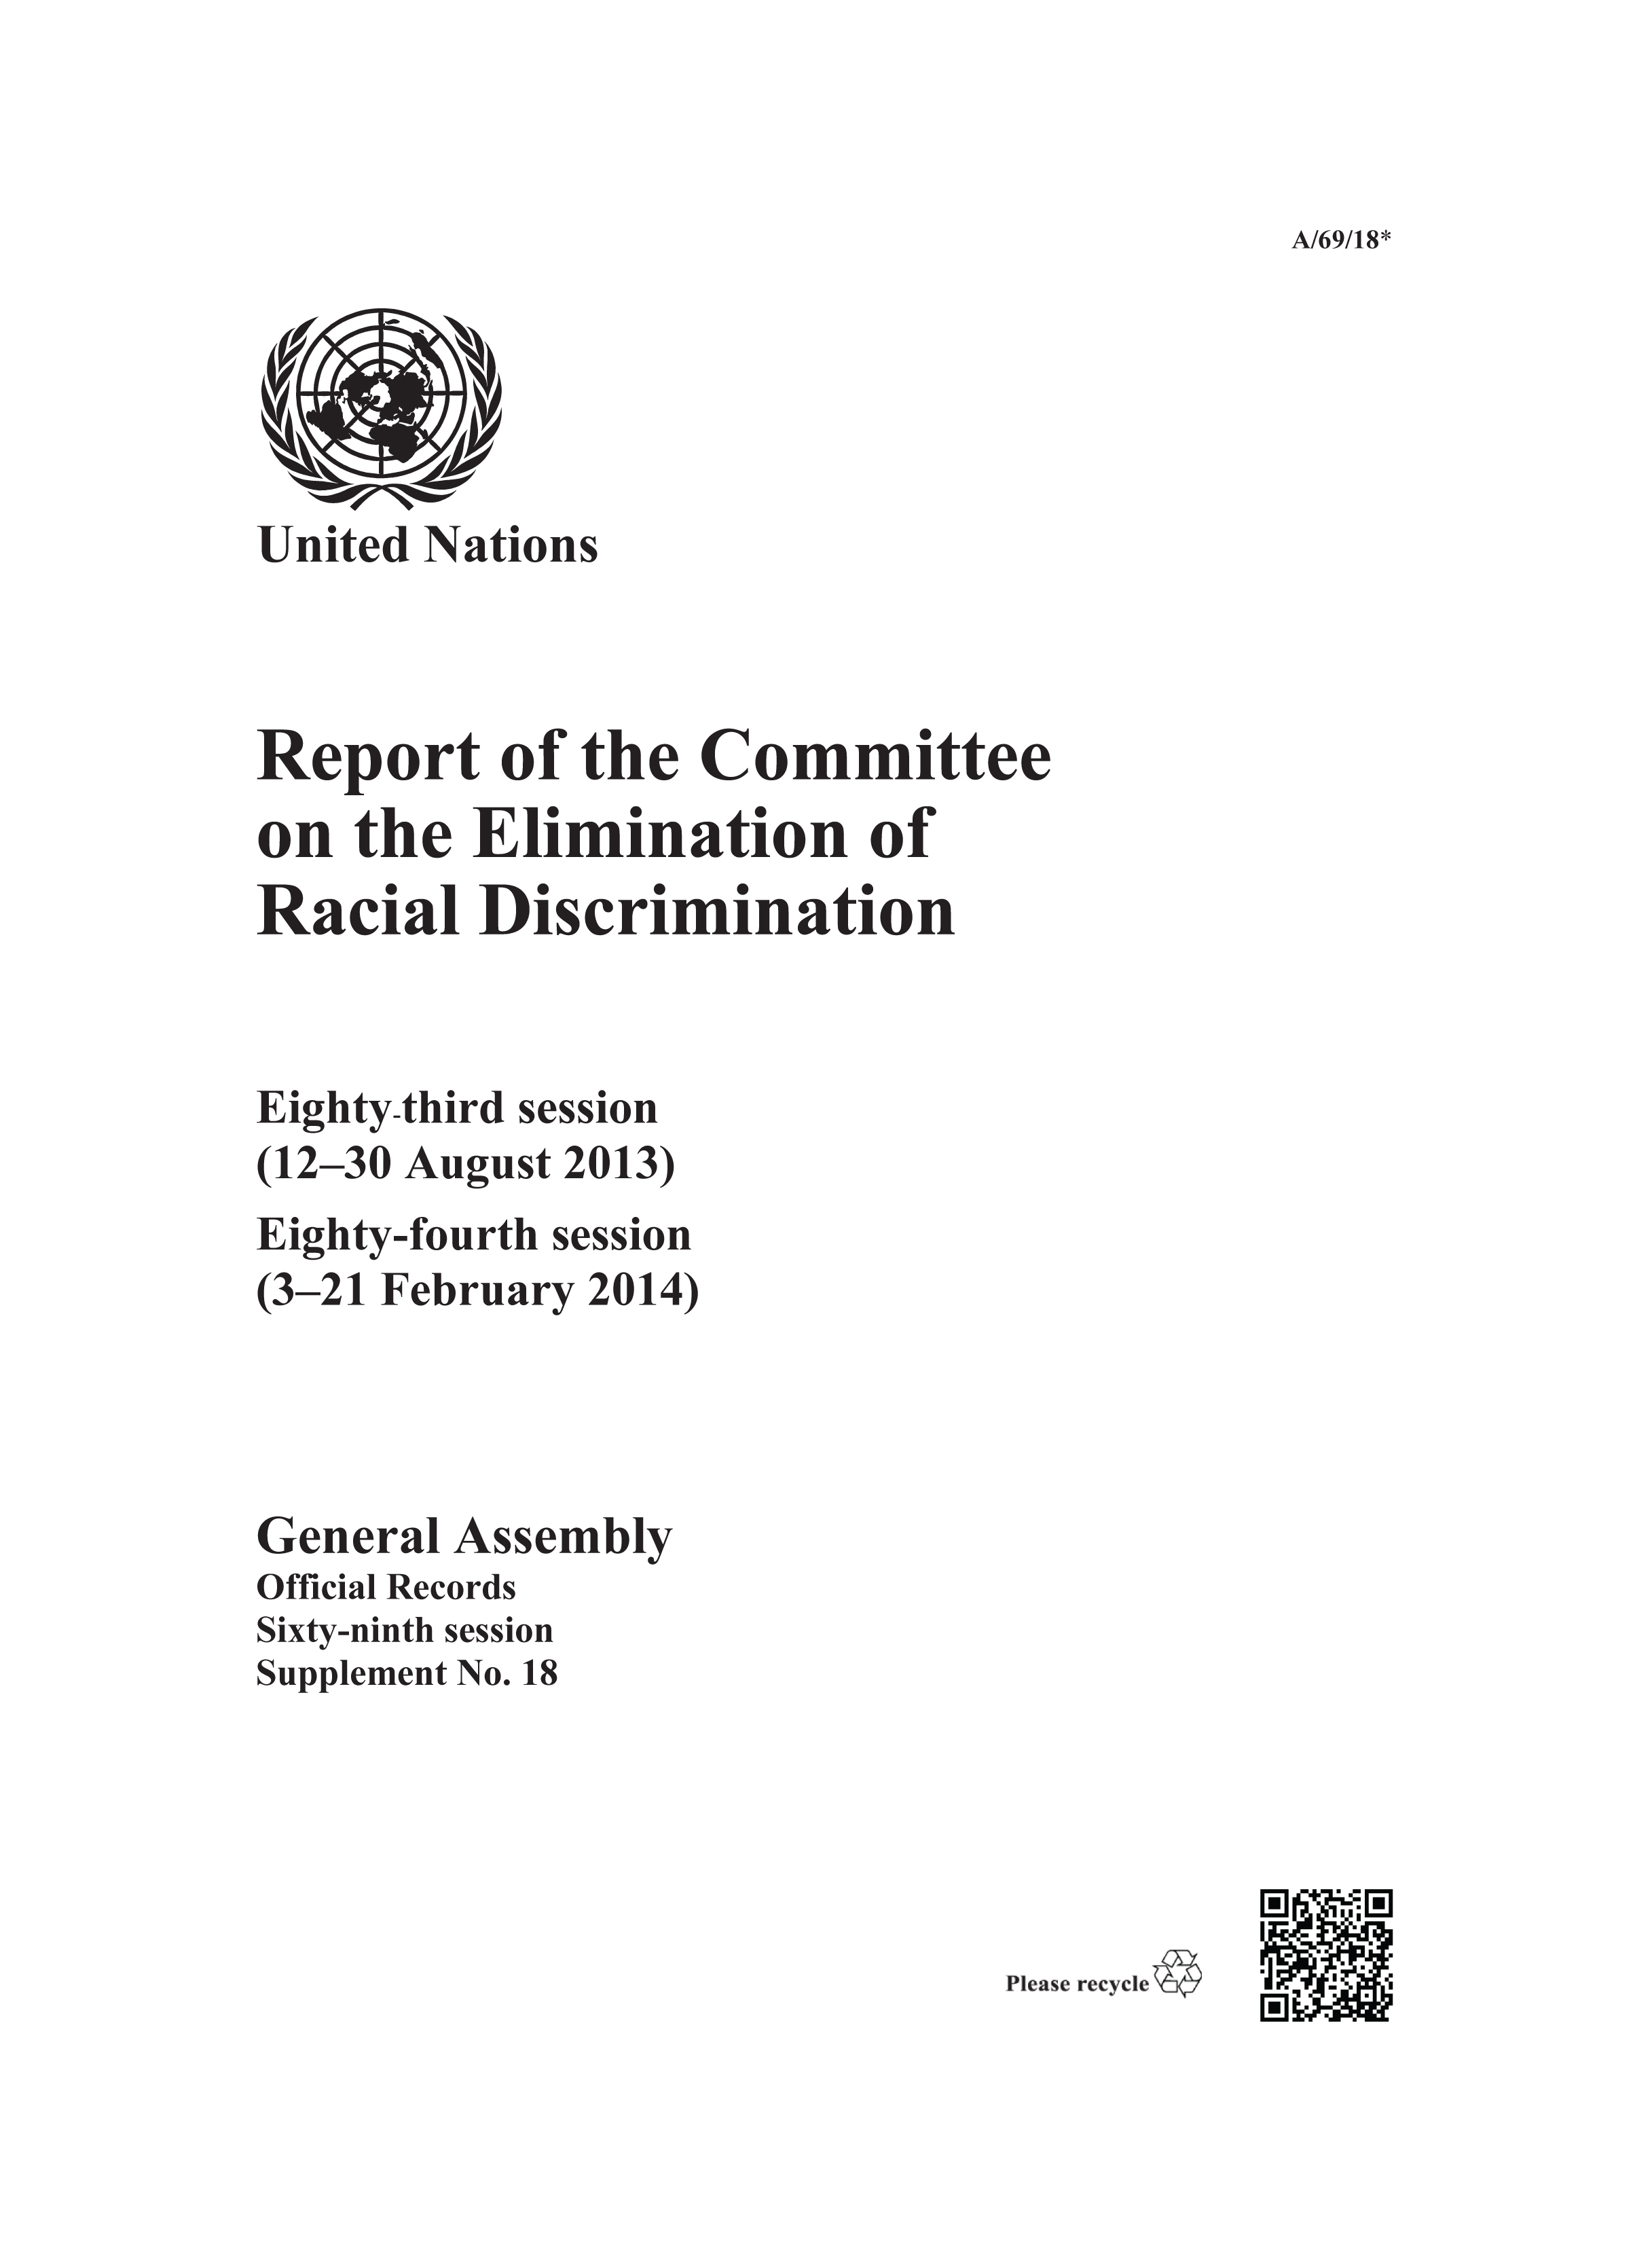 image of Report of the Committee on the Elimination of Racial Discrimination, Sixty-ninth Session